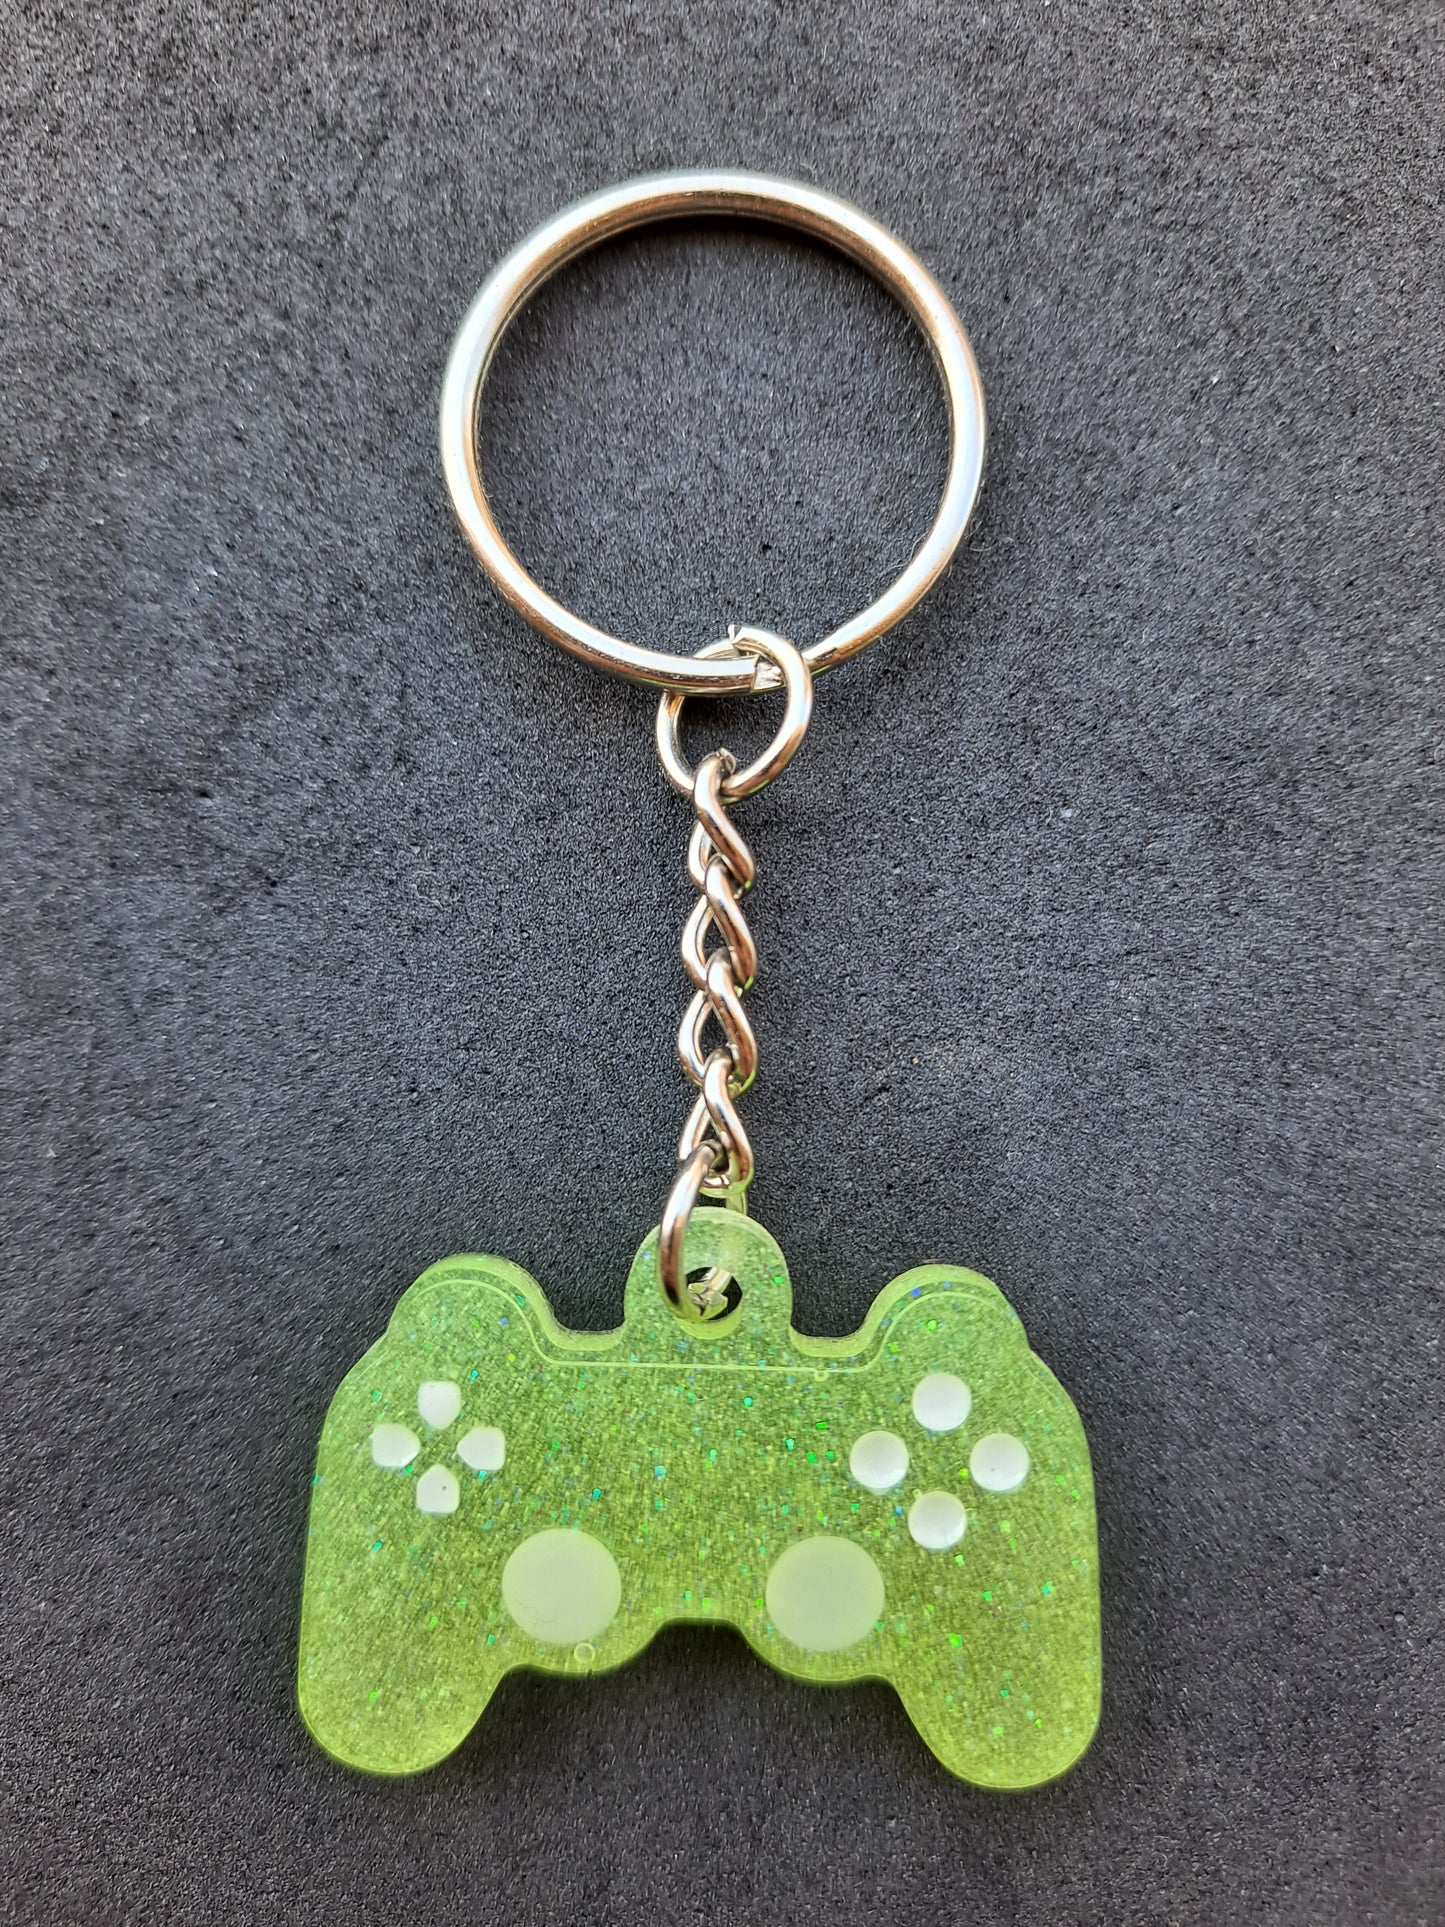 Retro PS Controller Keychain